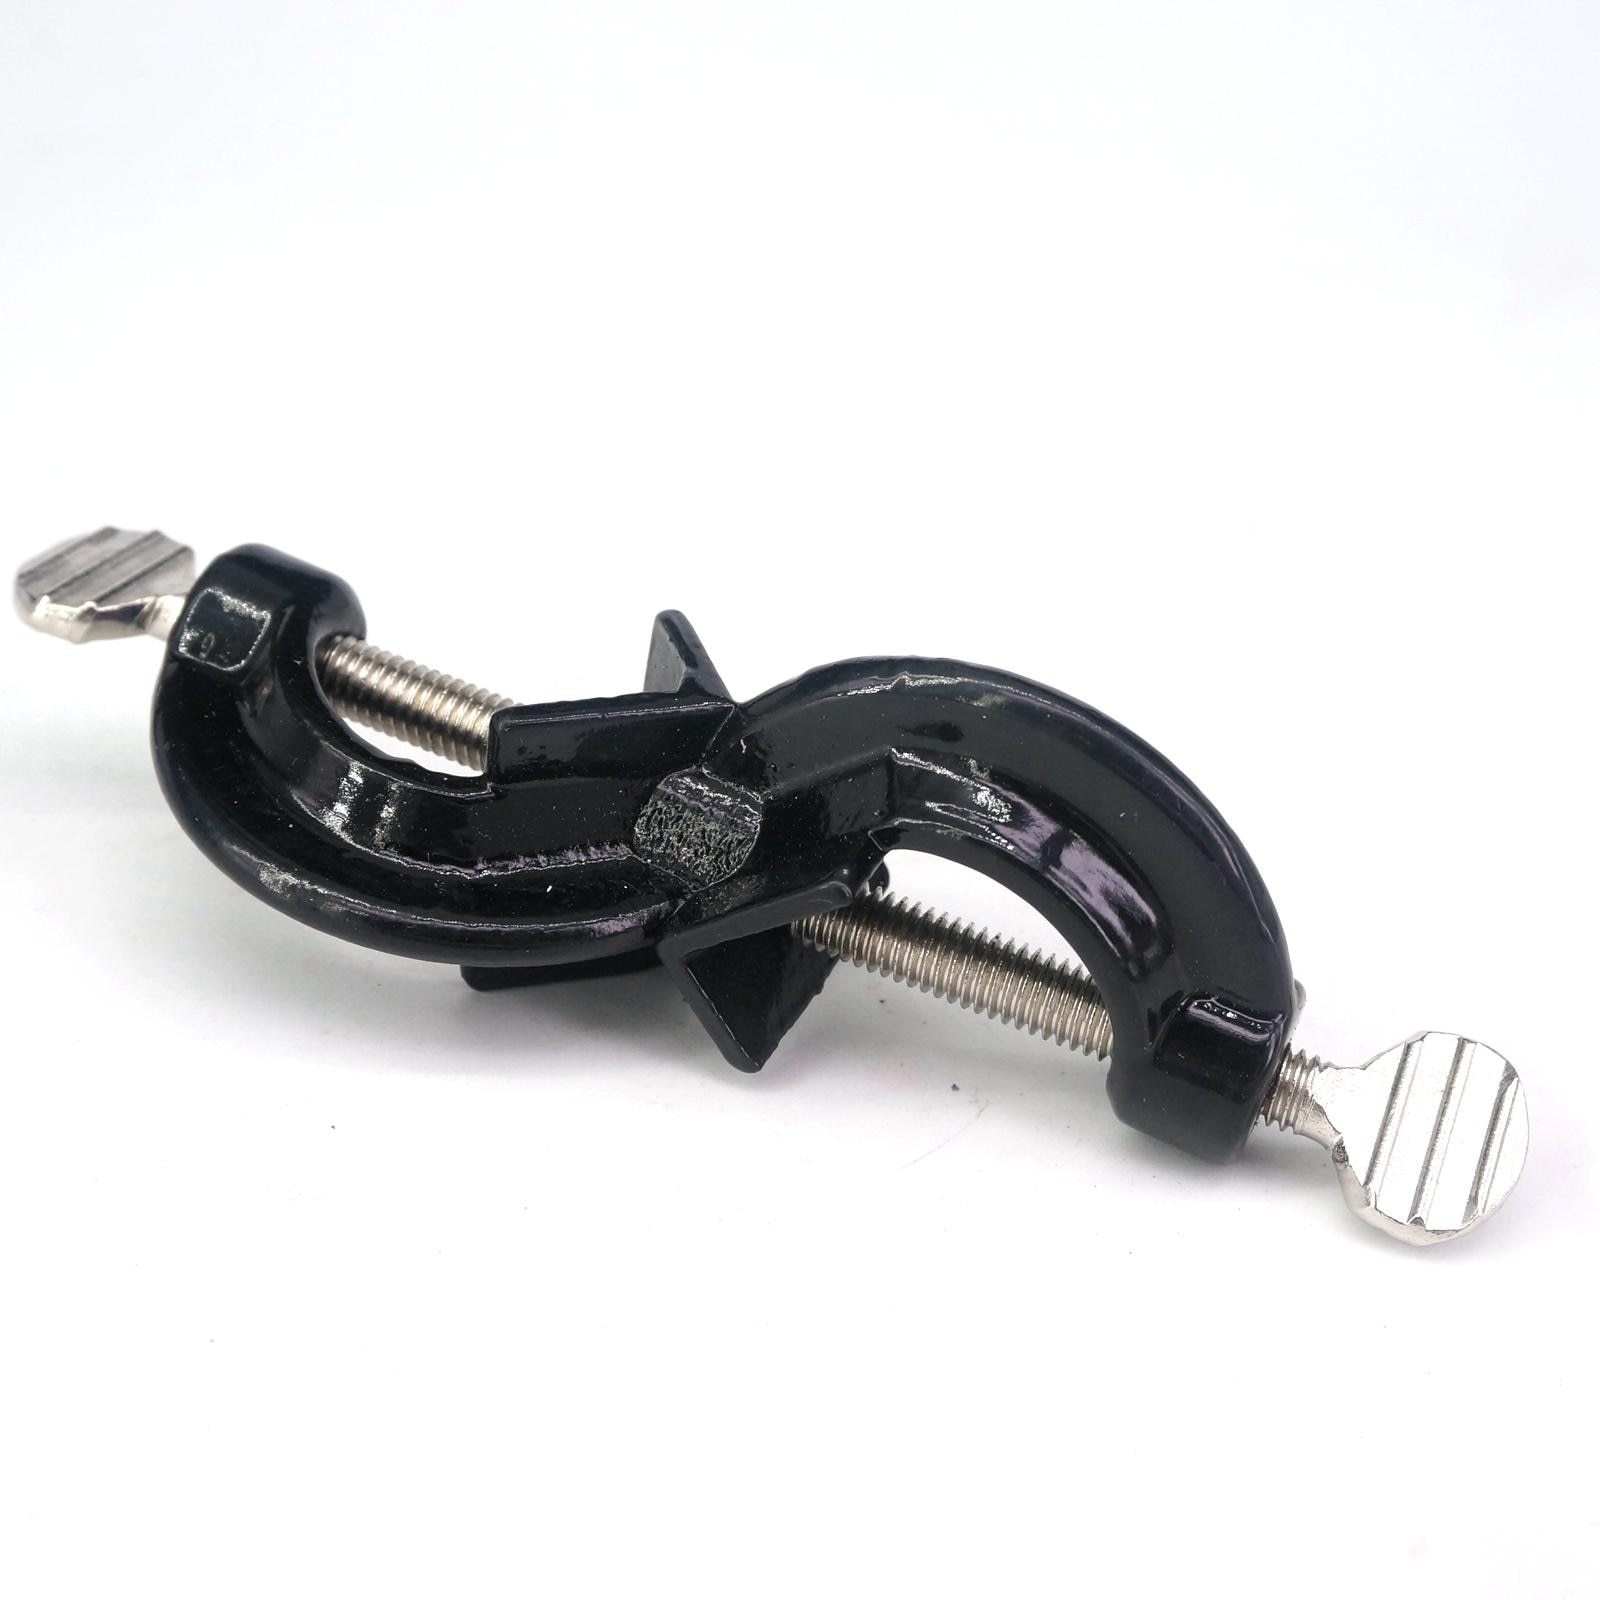 Metal Clamp Diameter 20mm Holder For Lab Laboratory Equipment Stands Clips Chemistry Kit Retention